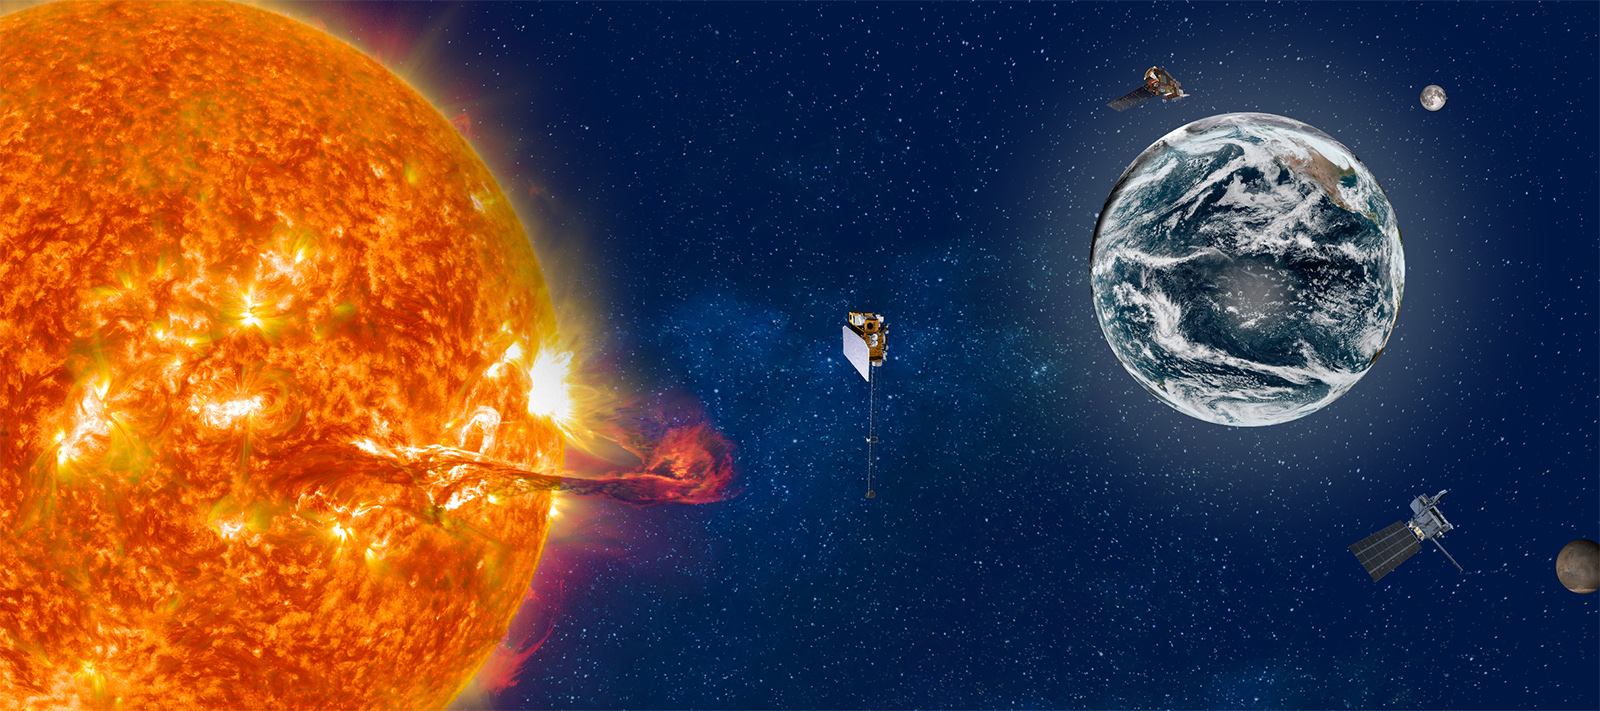 Illustration of the Sun and Earth, with multiple spacecrafts in space.